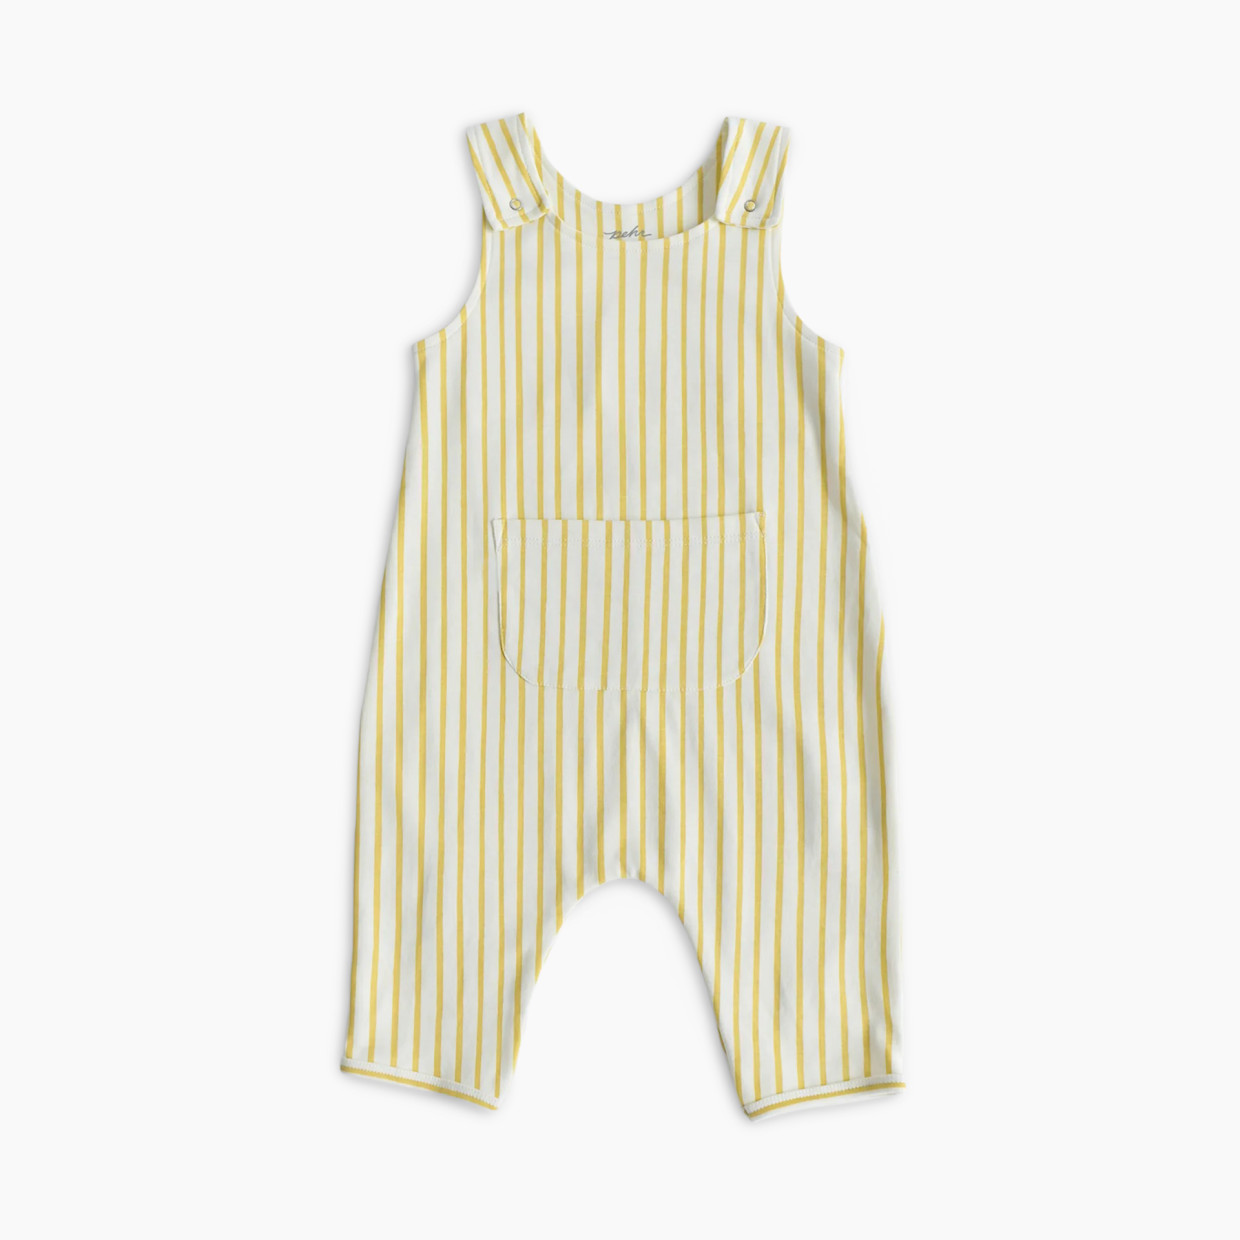 Pehr Stripes Away Overall - Marigold, 3 T.